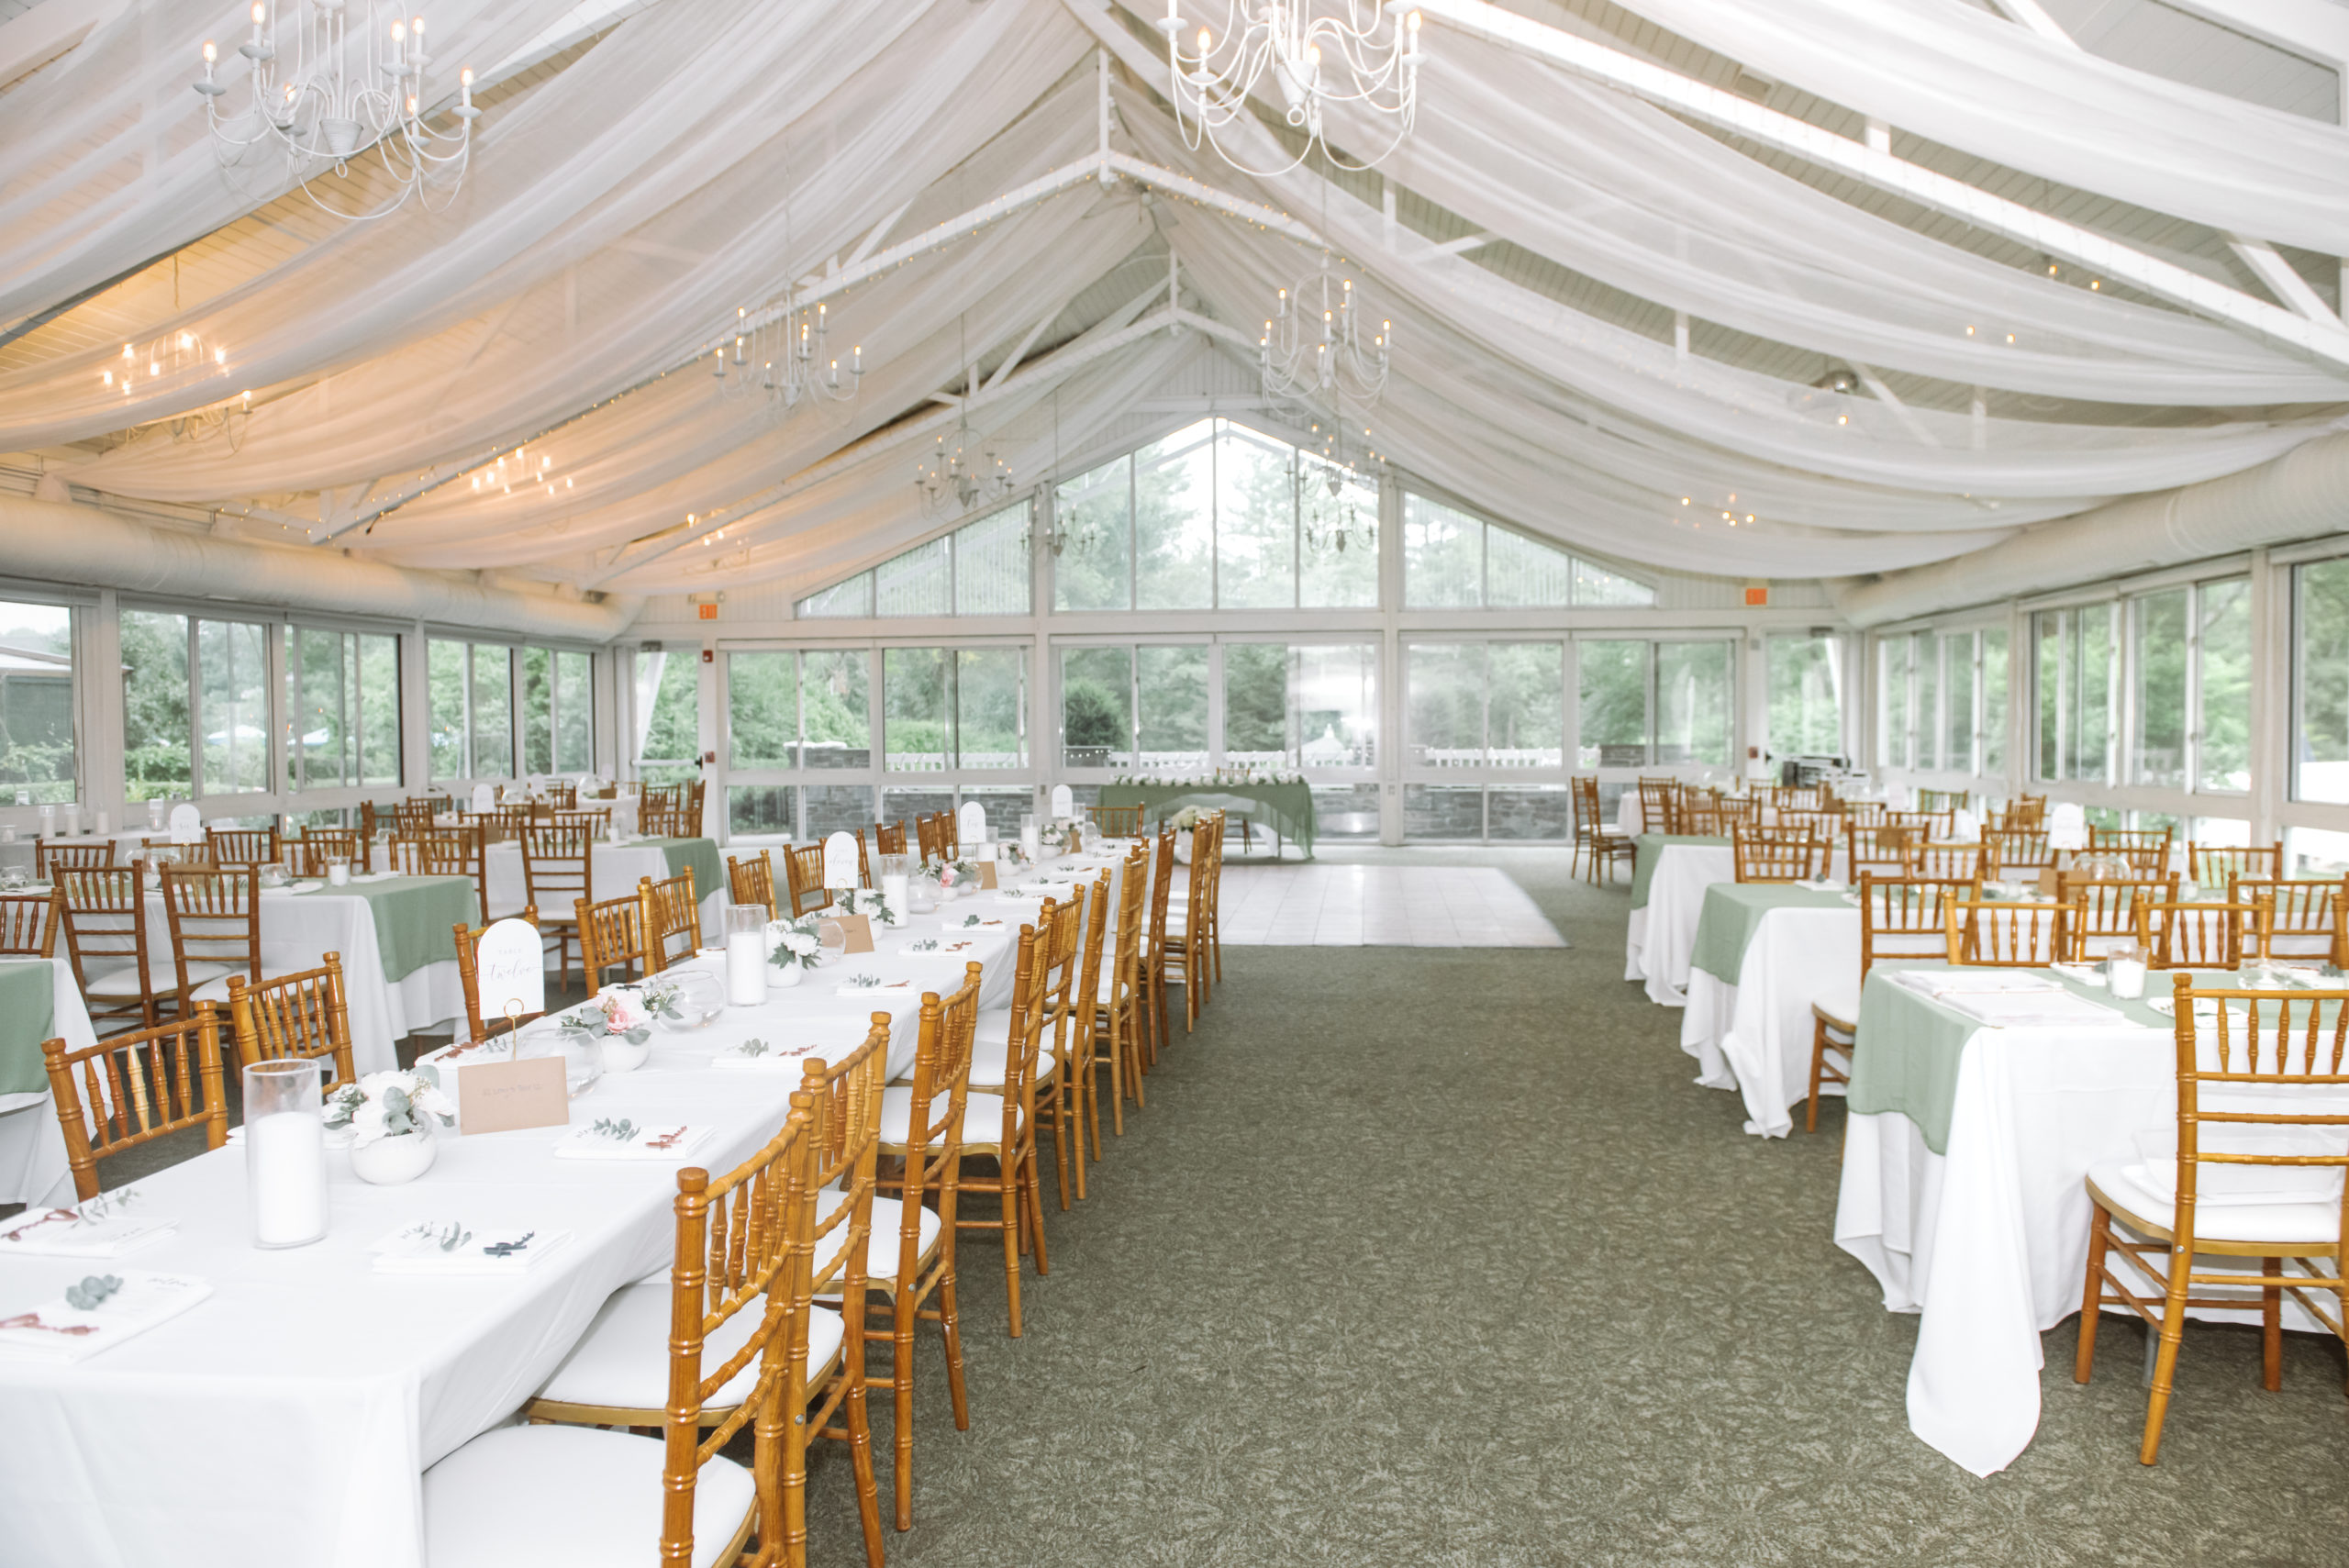 Reception venue full of set tables, hanging white sheer curtains on the ceiling, small chandeliers hanging from the ceiling, and a dance floor in the far section of the room.